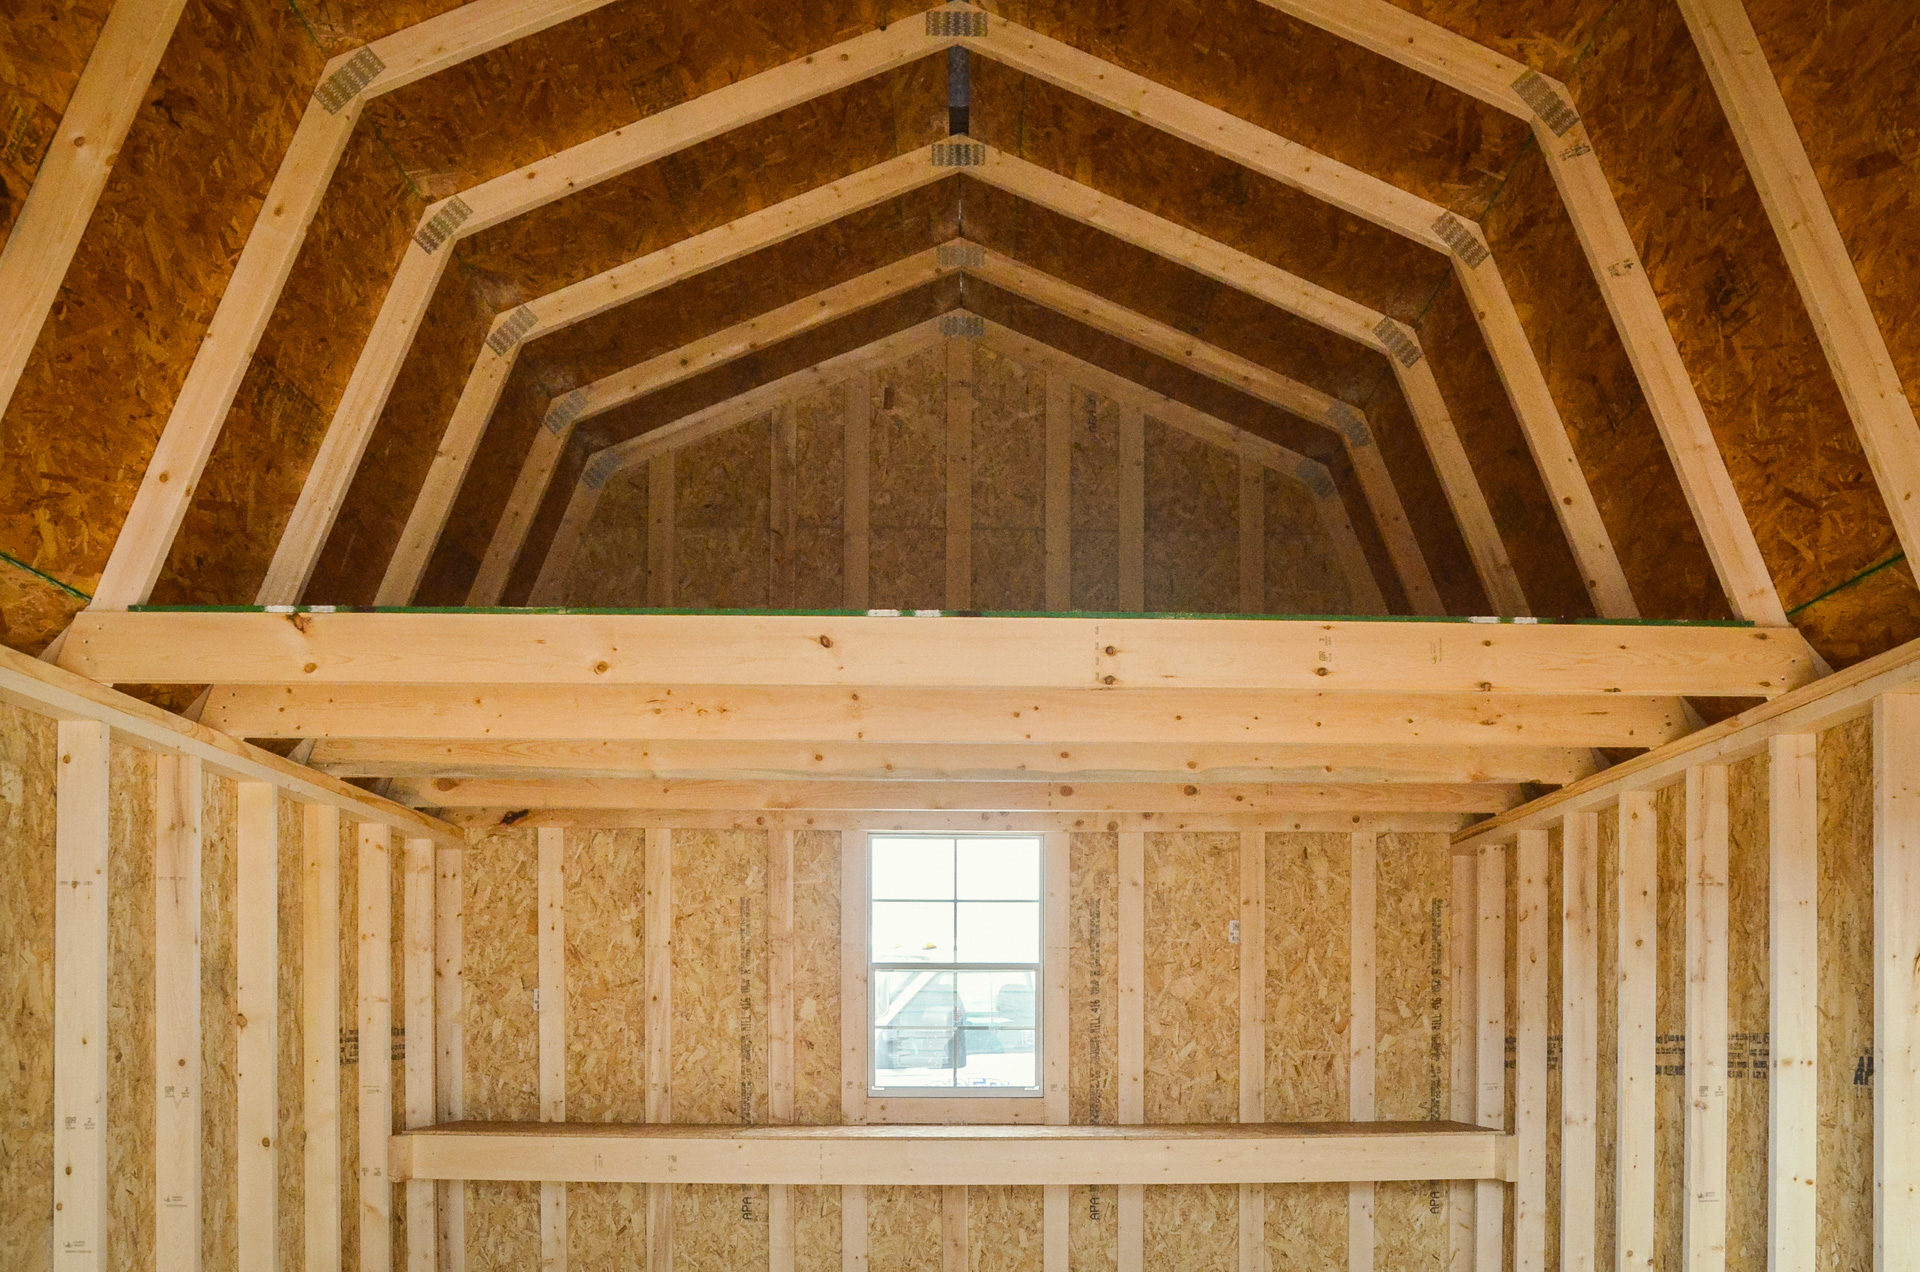 Barn style shed with loft plans ~ Learn shed plan dwg